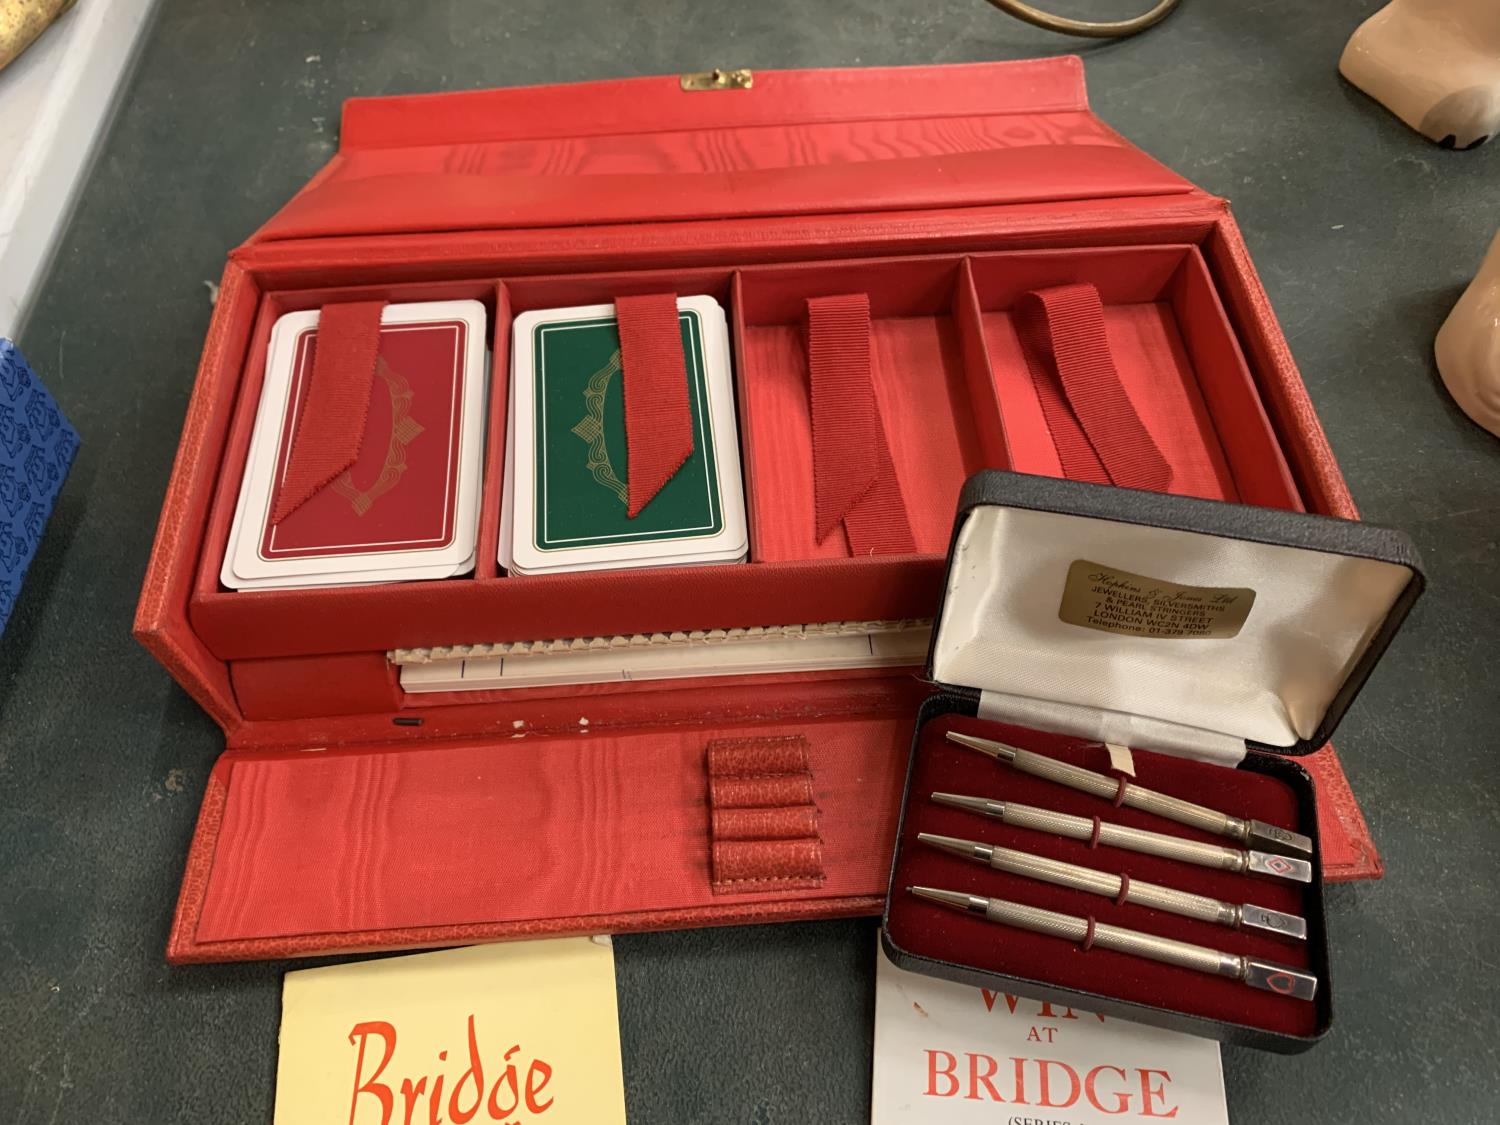 A BOXED BRIDGE SET TO INCLUDE A SET OF STERLING SILVER PROPELLING PENCILS - Image 2 of 2